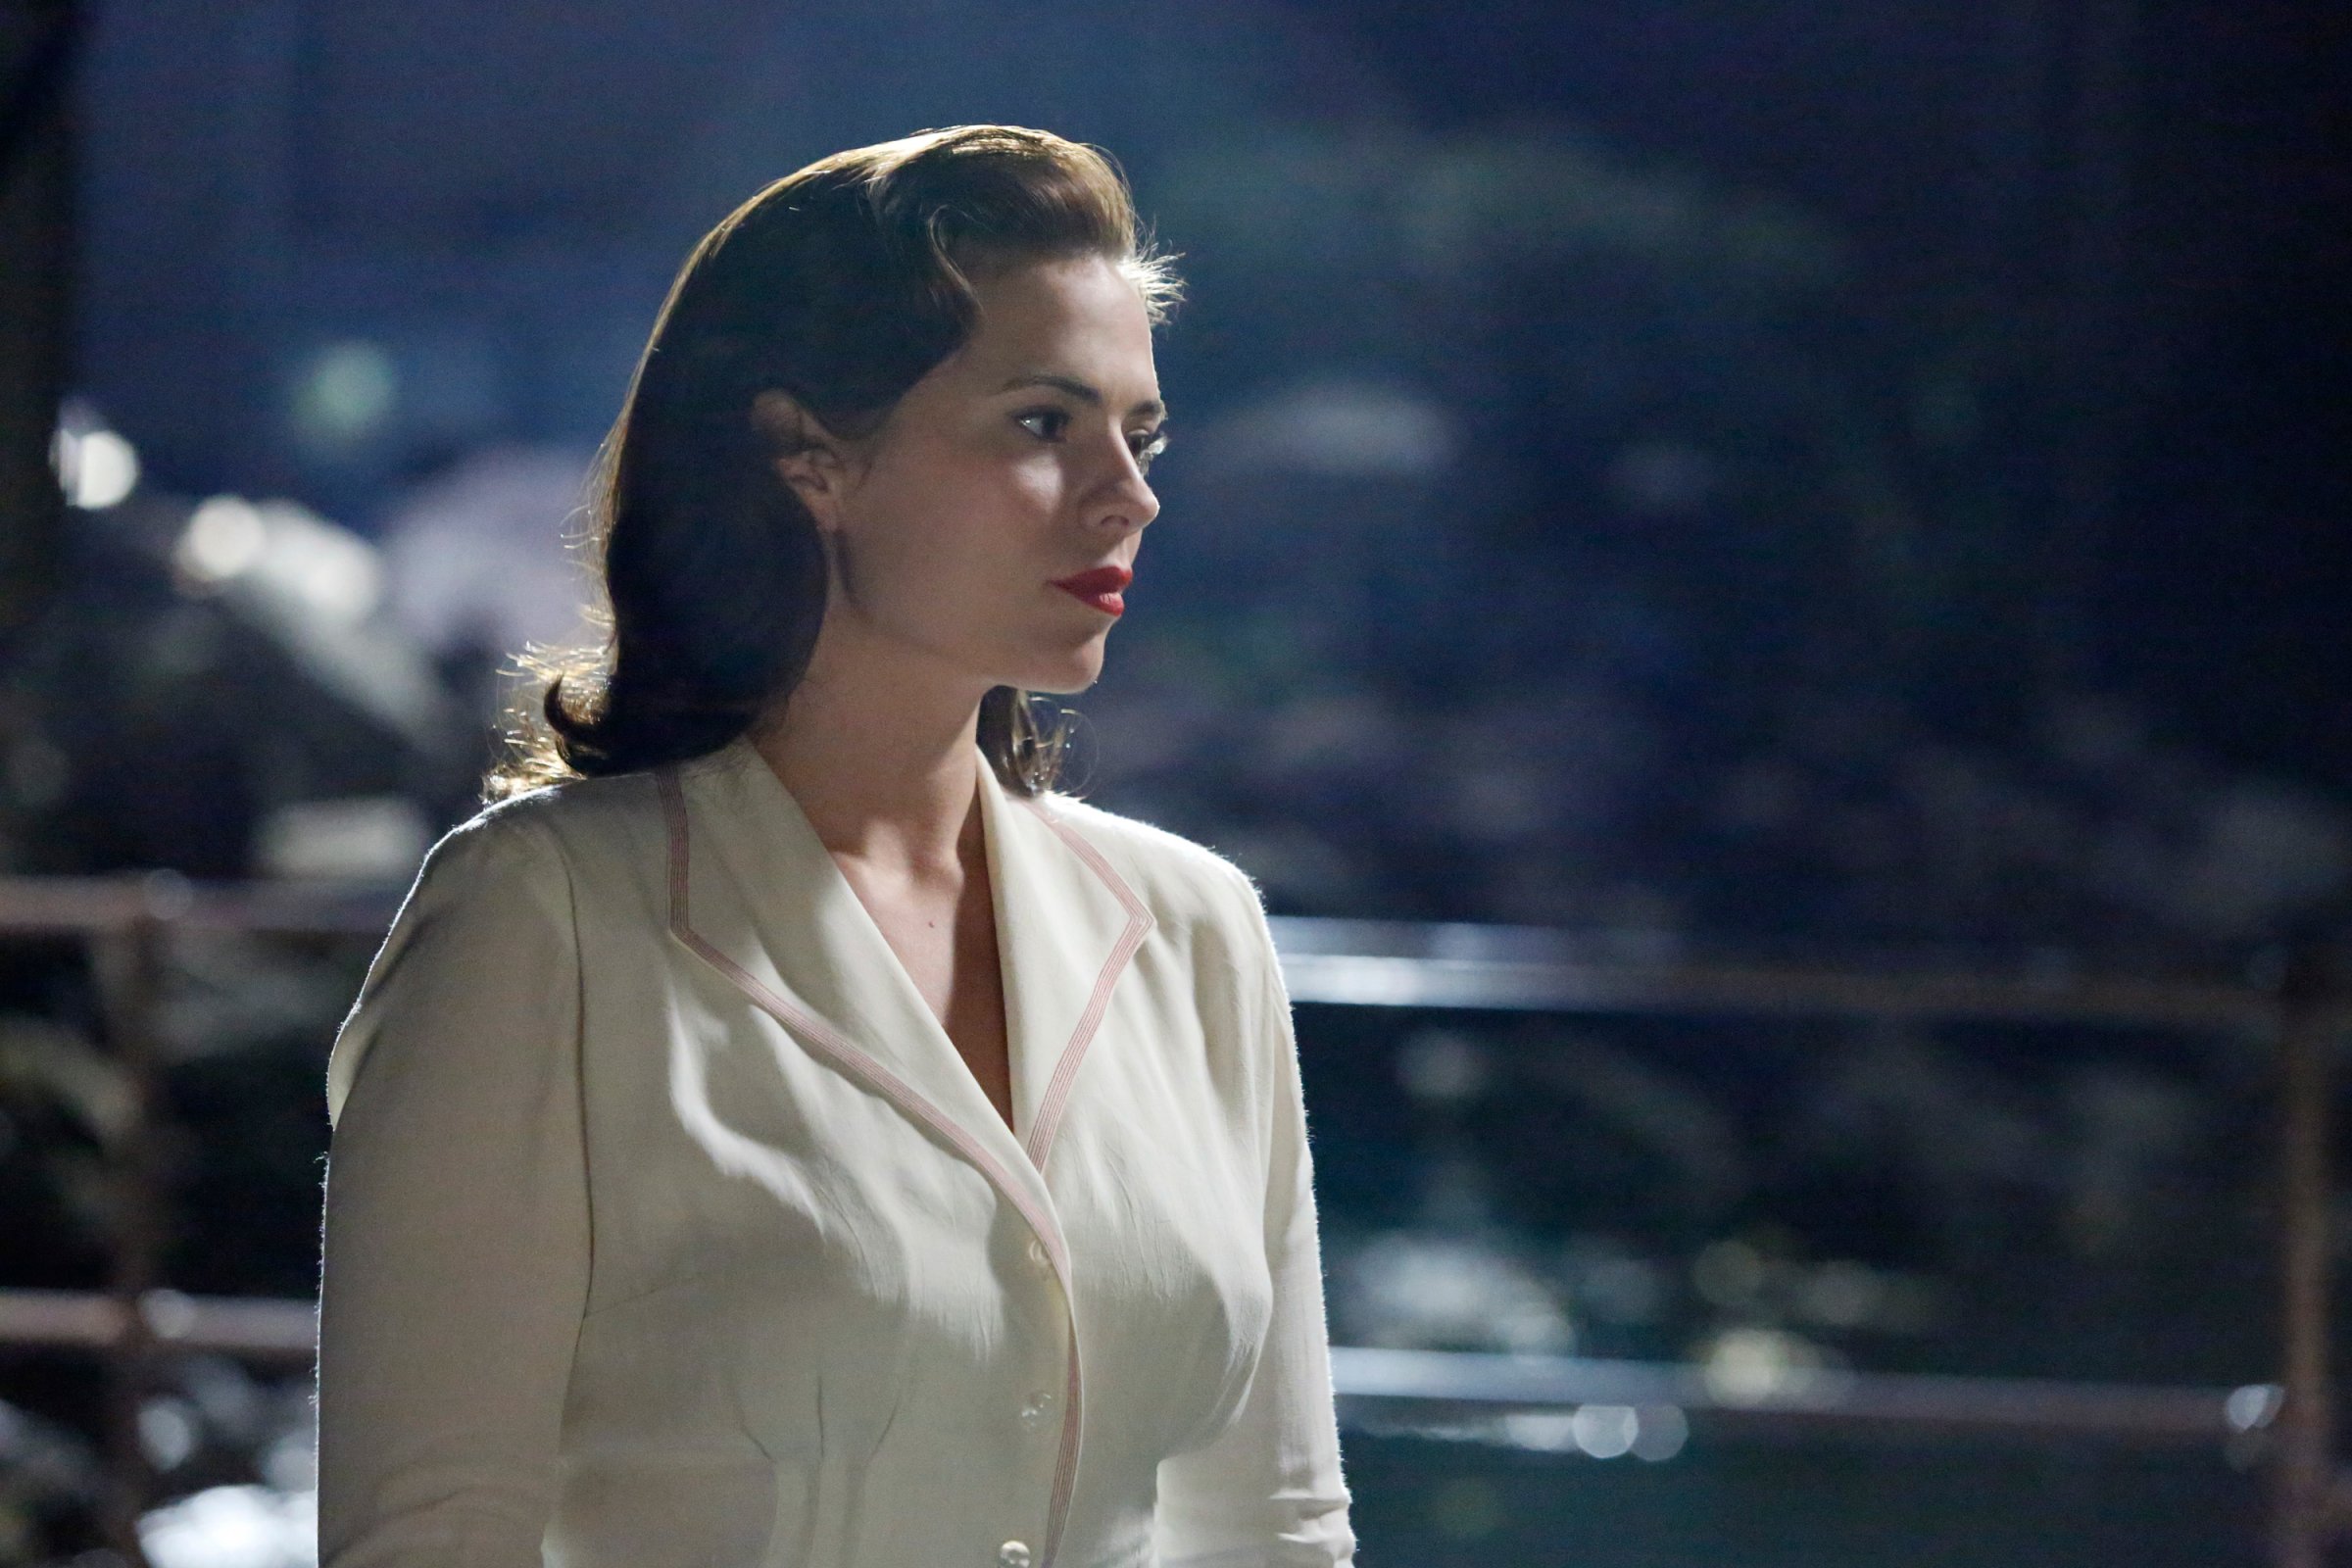 Hayley Atwell as Agent Peggy Carter in "Marvel's Agent Carter."